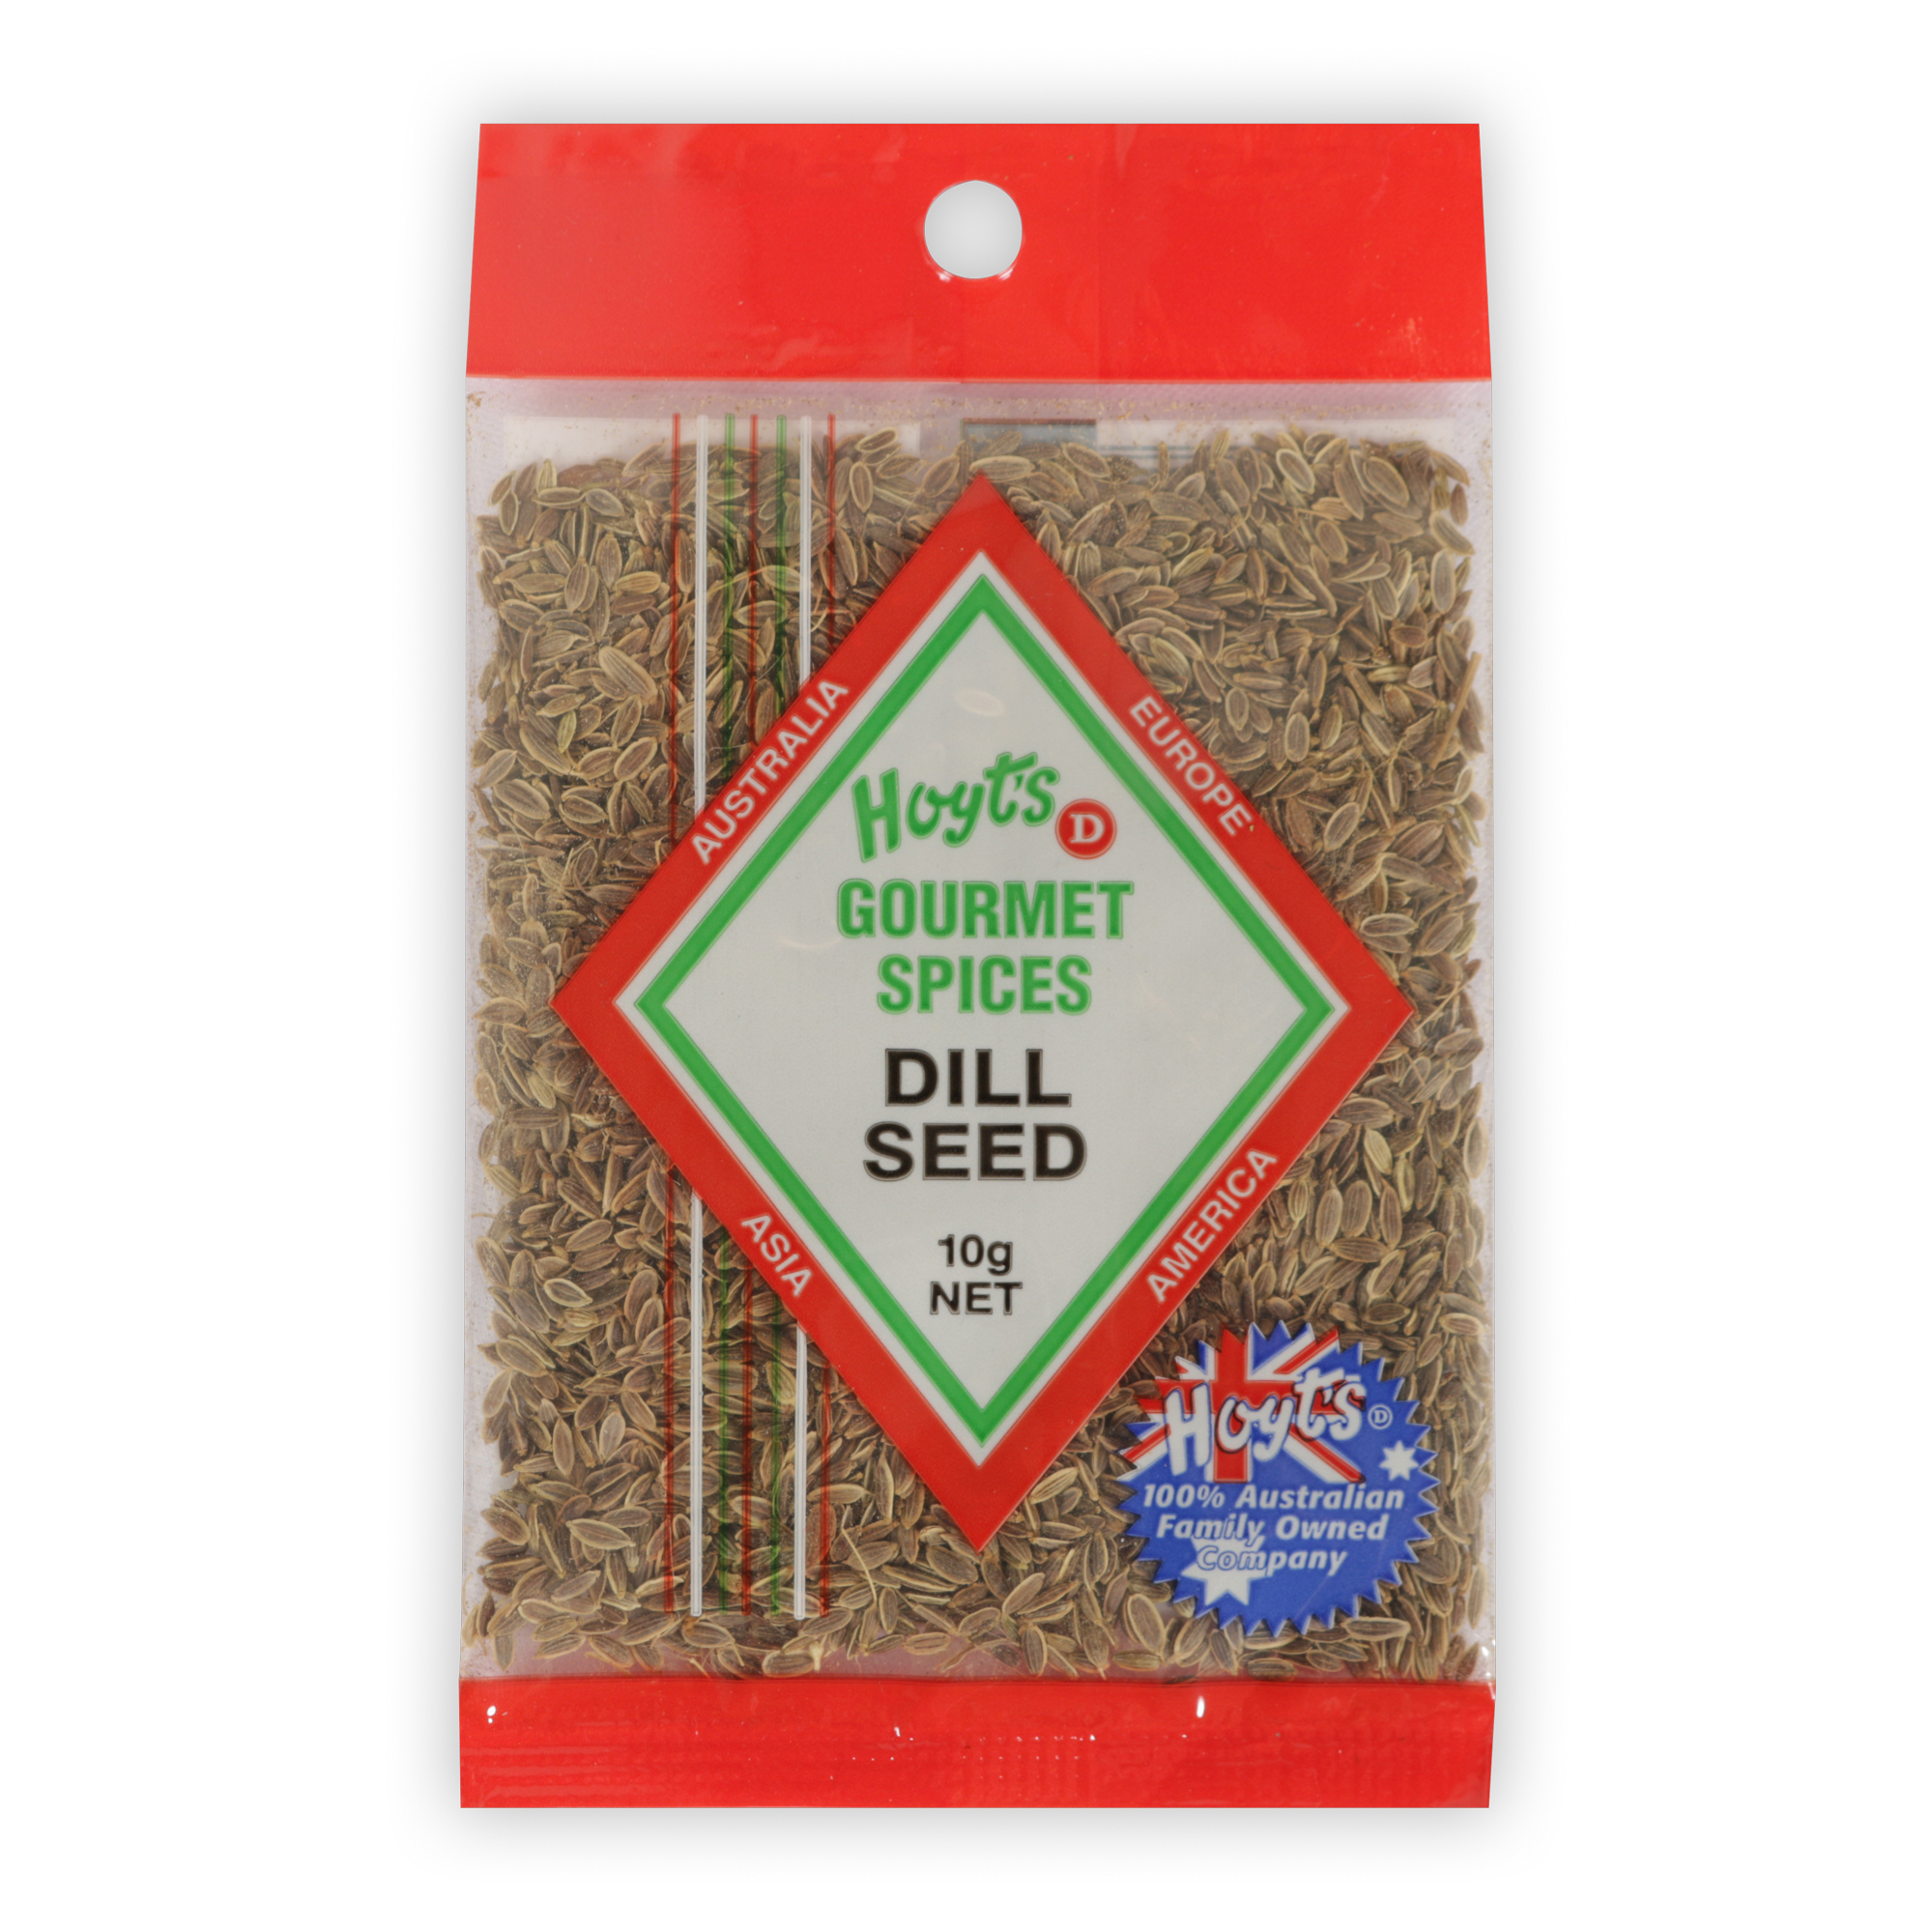 Gourmet Dill Seed 10g - 9300725010652 1